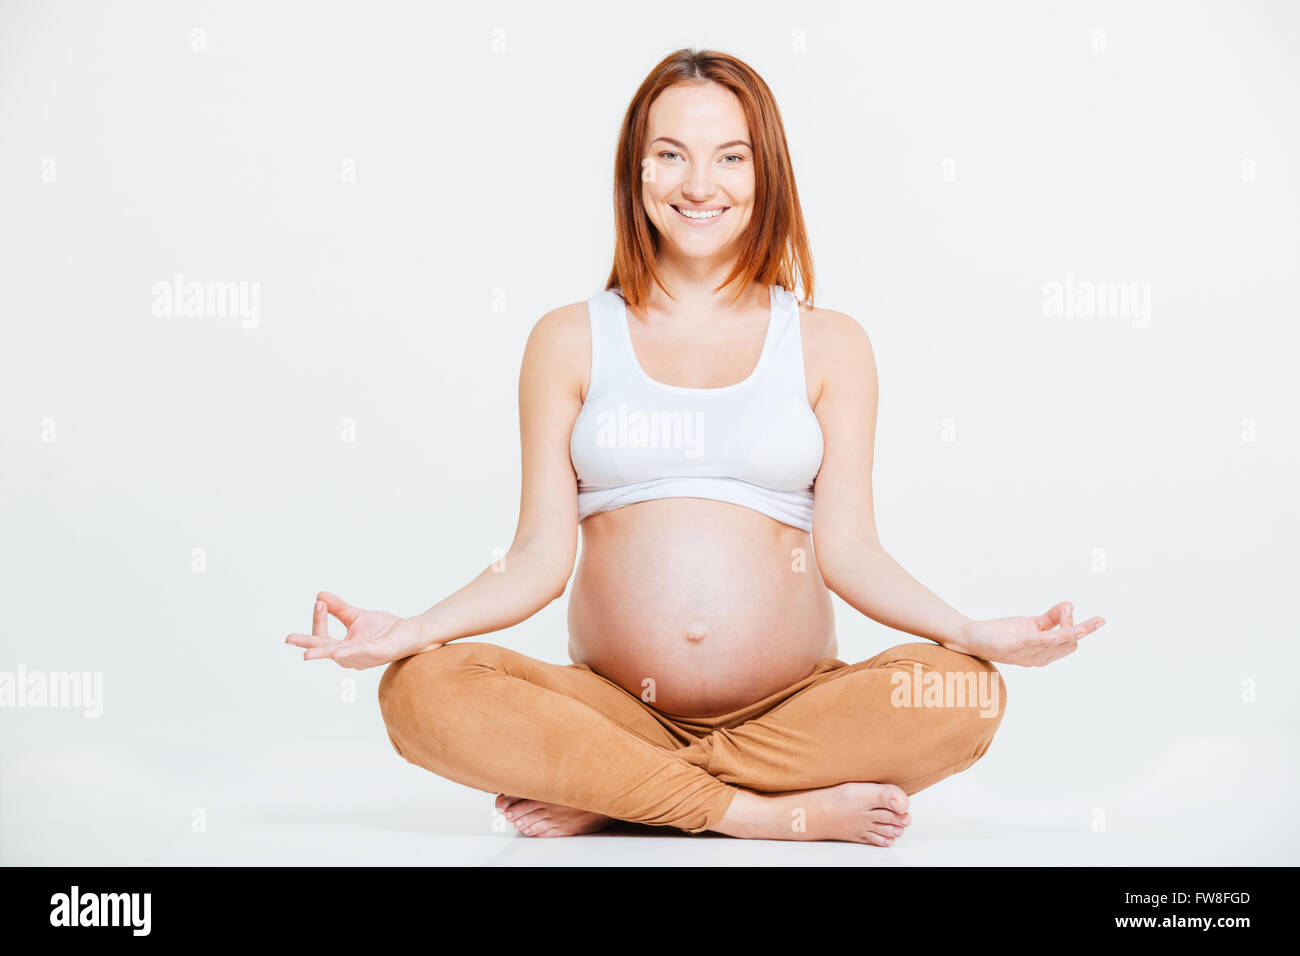 Smiling pregnant woman meditating isolated on a white background Stock Photo